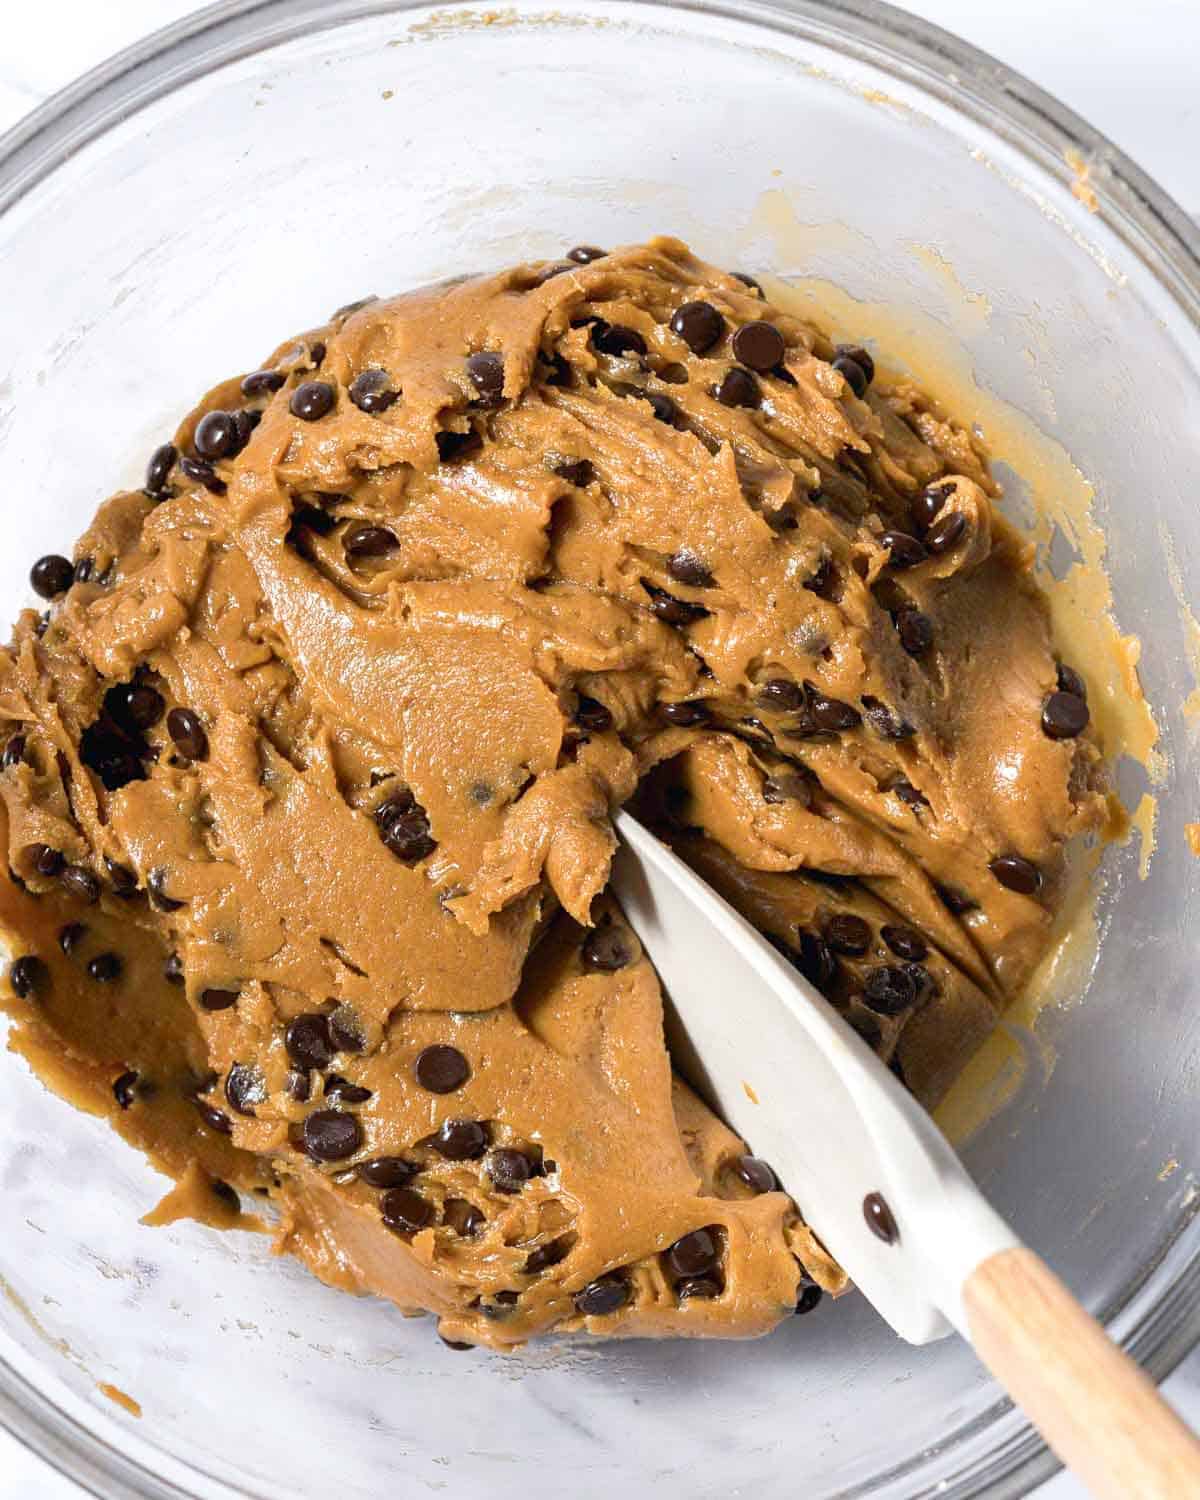 spatula in the chocolate chip cookie dowl in a bowl.